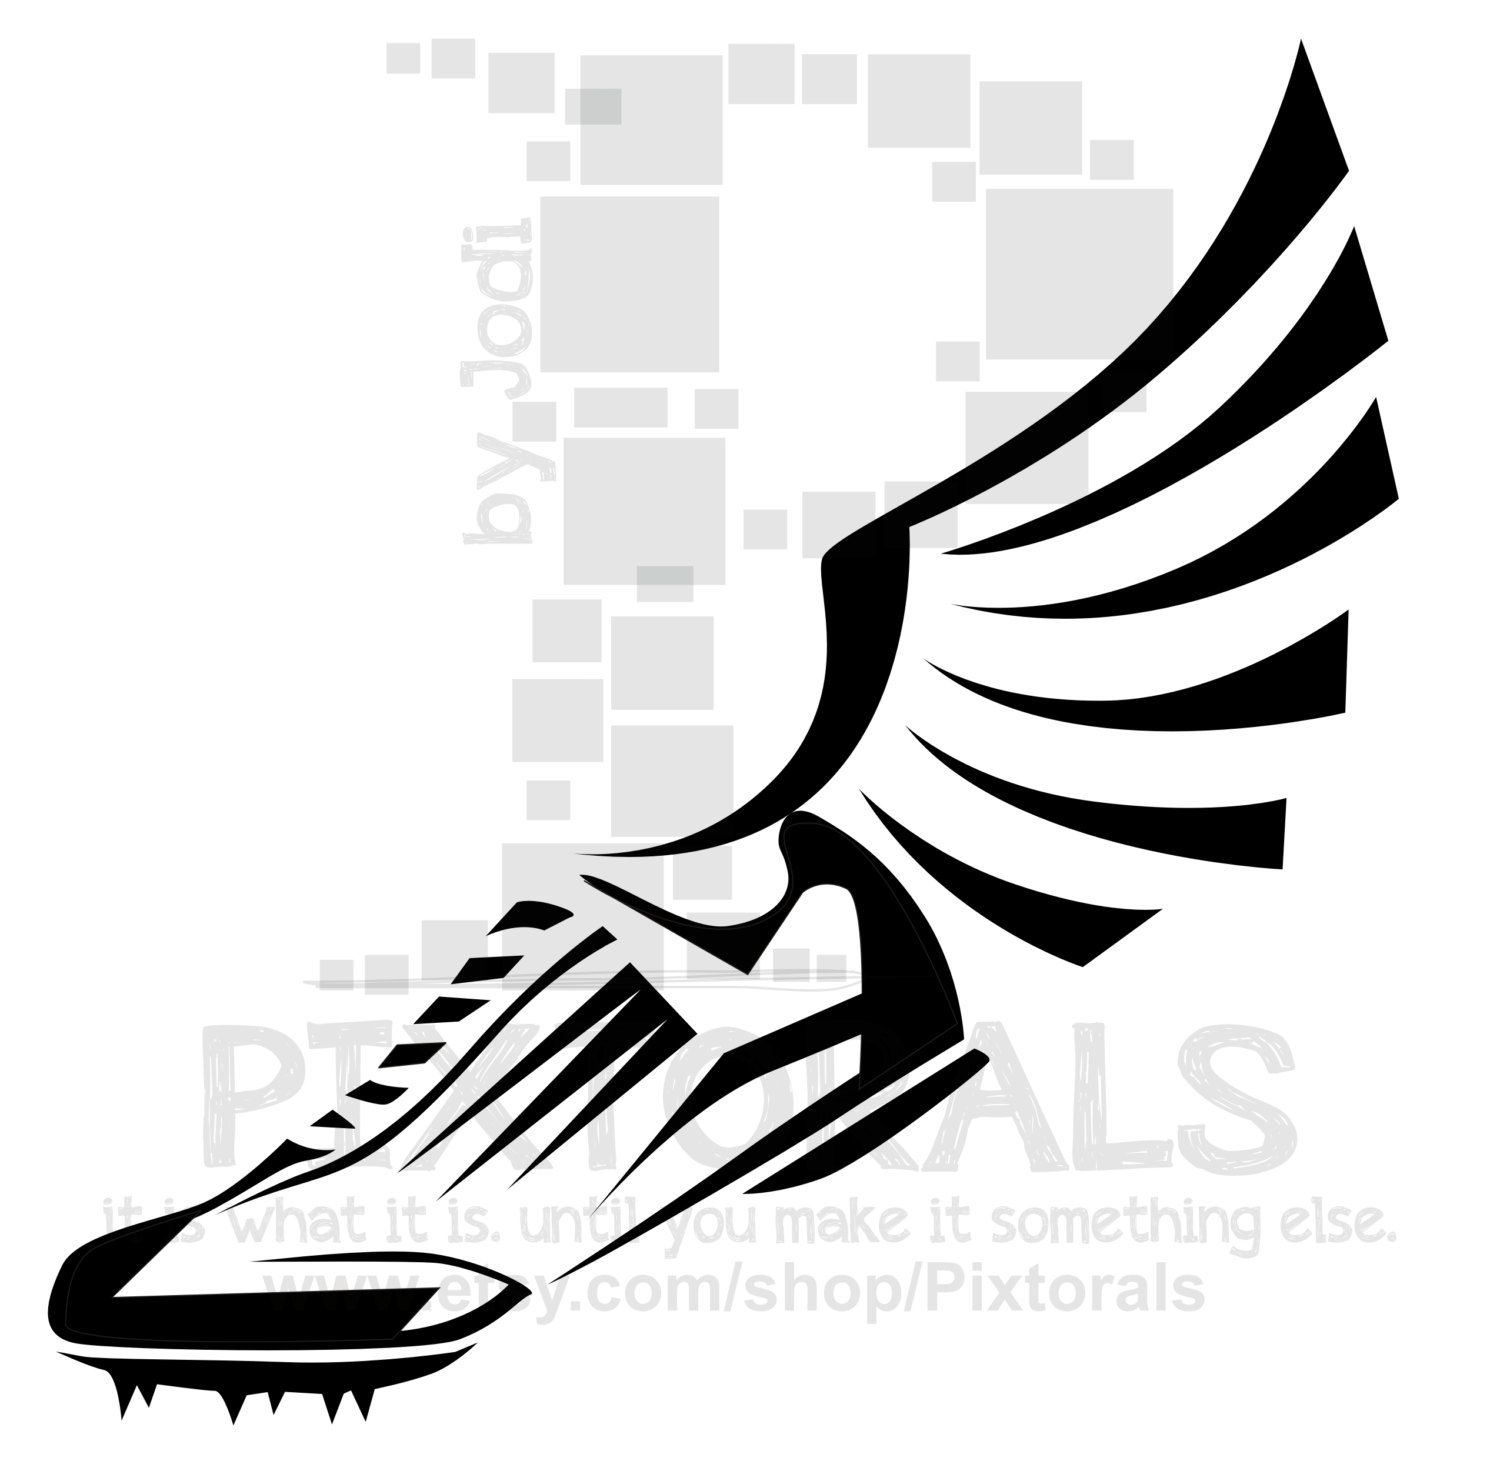 Track Winged Shoe Clipart Eps File Vector And Jpeg By Pixtorals